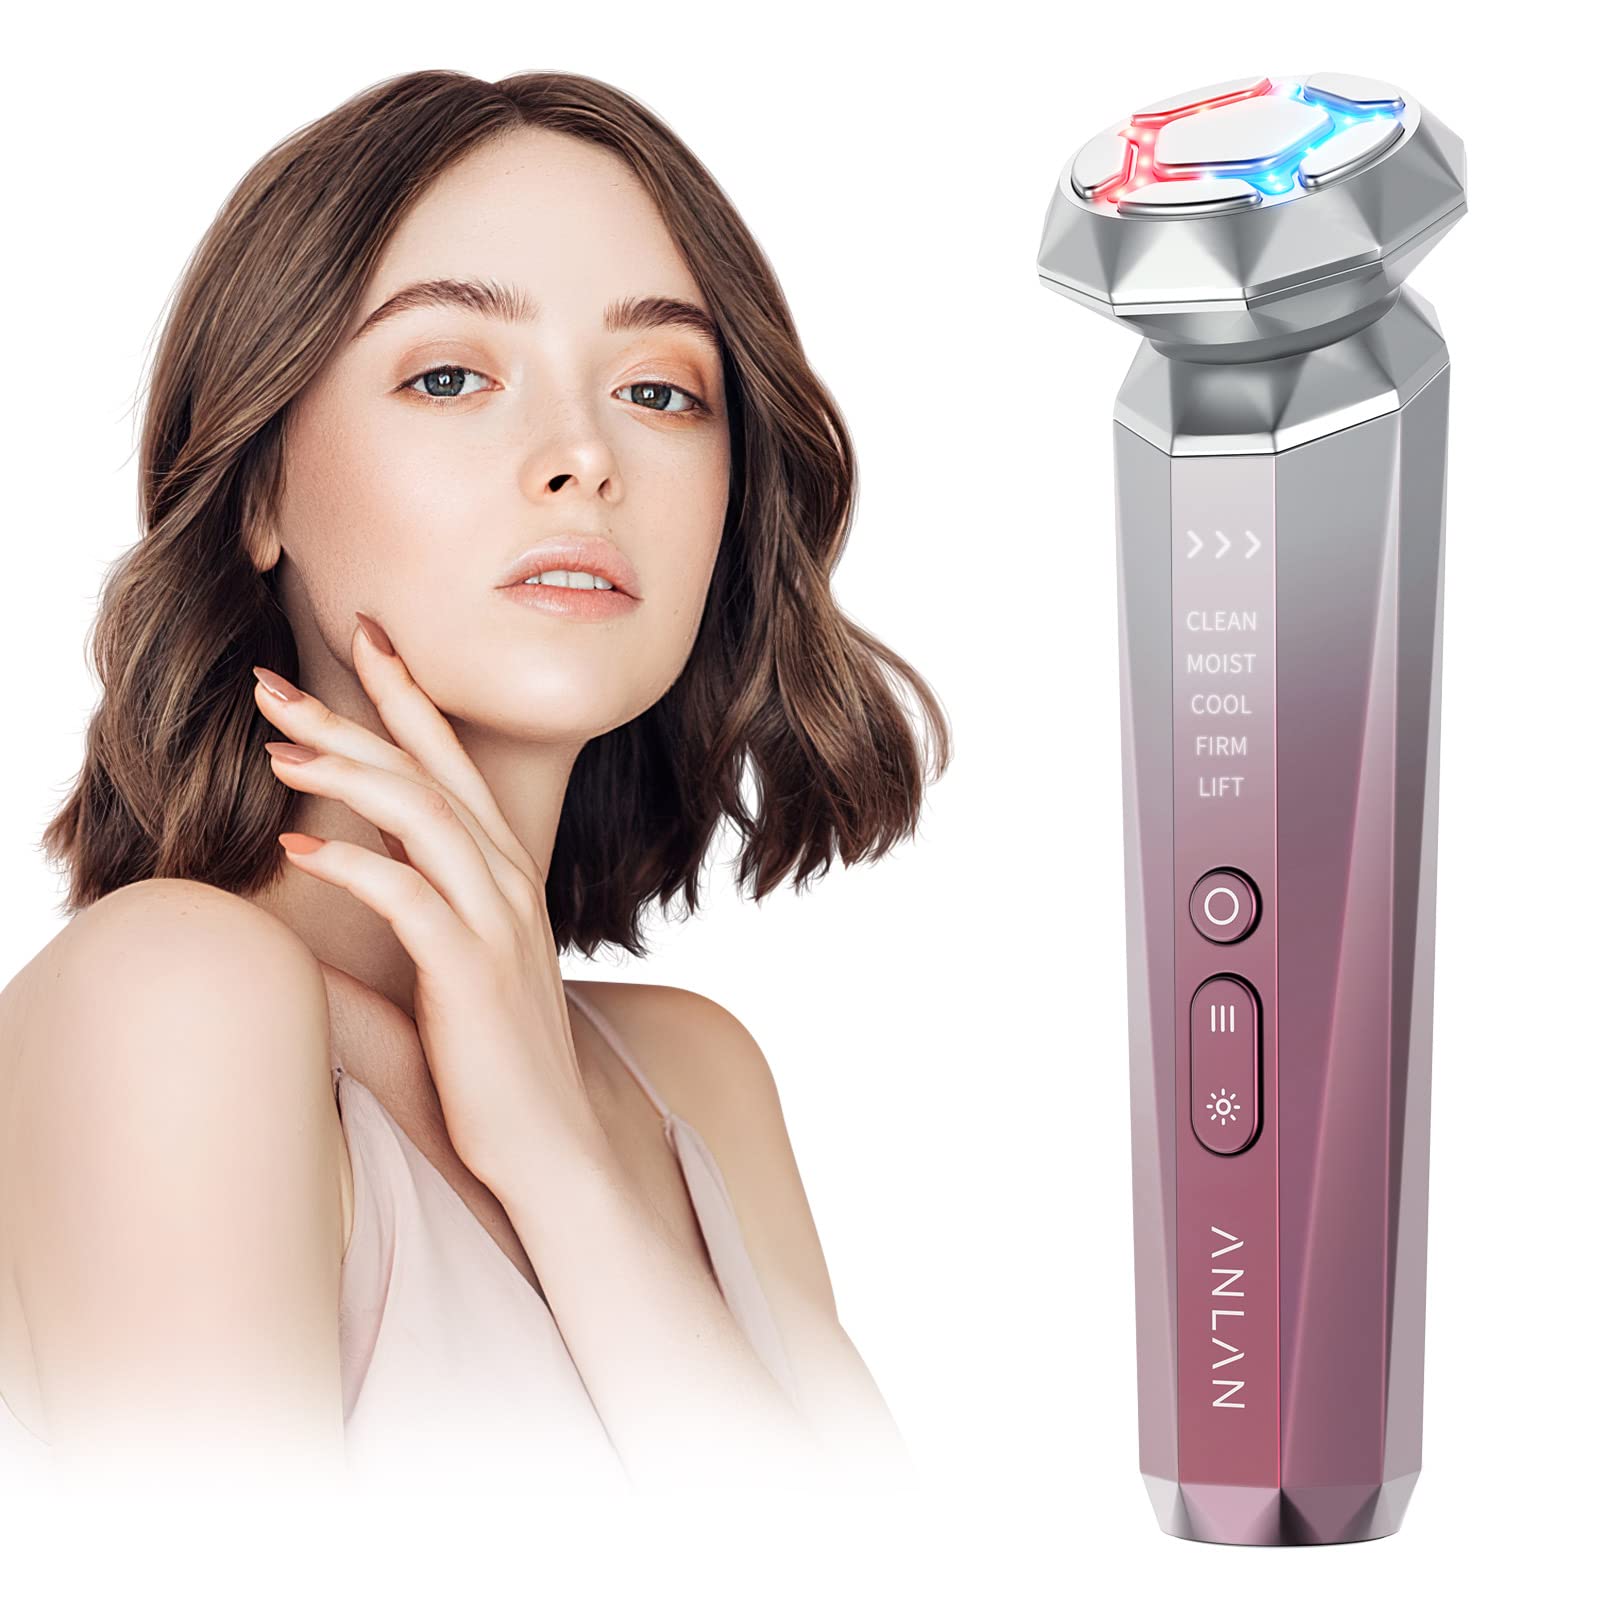 New skin care experience into home care beauty device | ANLAN